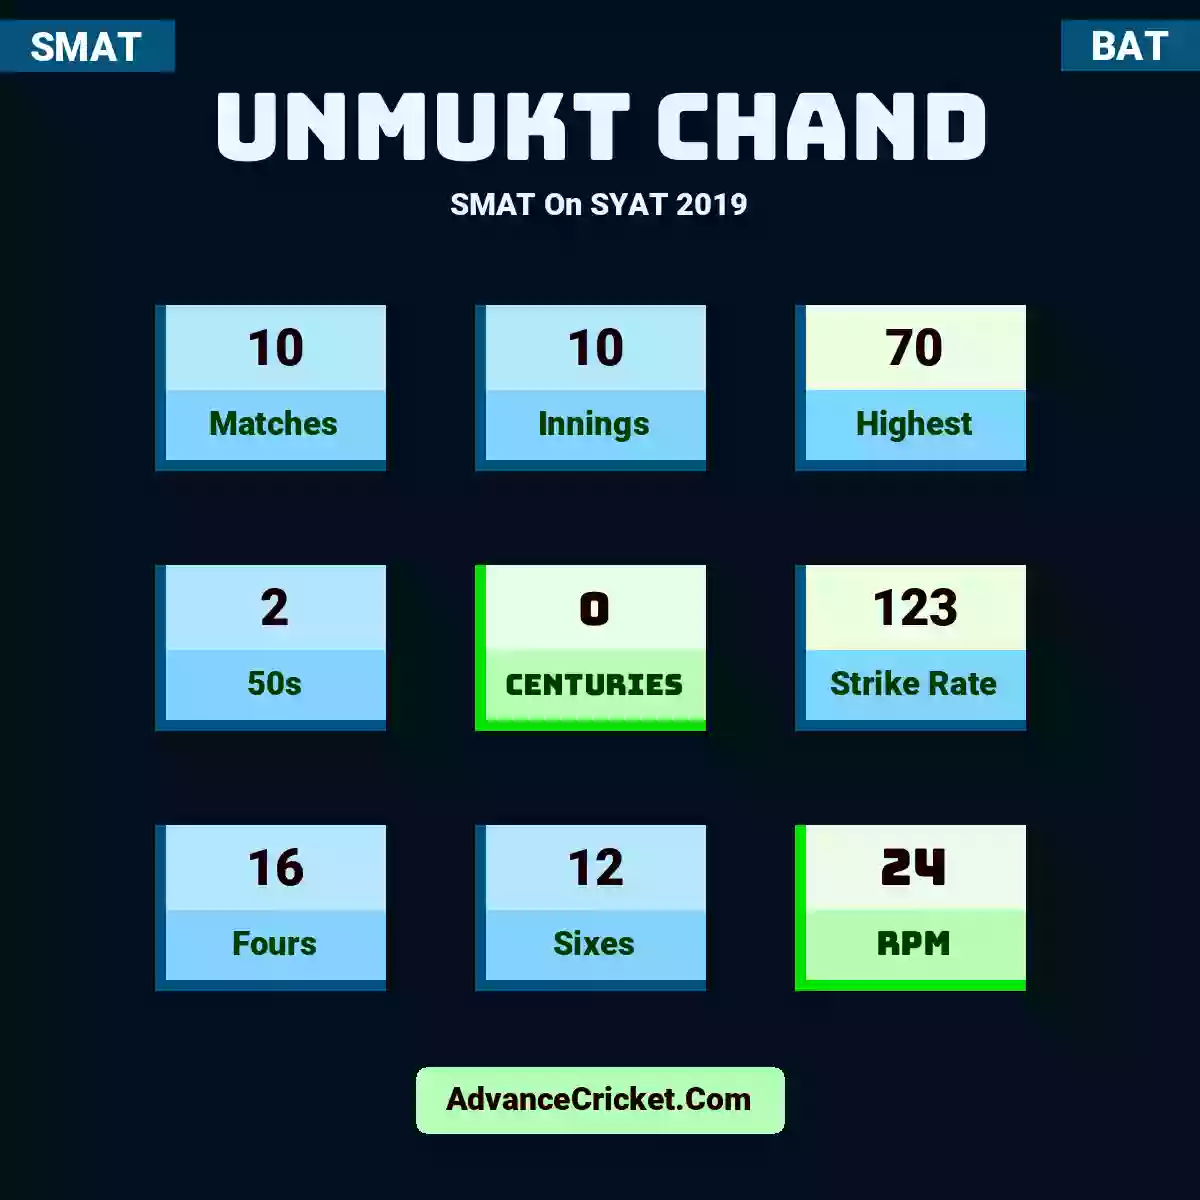 Unmukt Chand SMAT  On SYAT 2019, Unmukt Chand played 10 matches, scored 70 runs as highest, 2 half-centuries, and 0 centuries, with a strike rate of 123. U.Chand hit 16 fours and 12 sixes, with an RPM of 24.